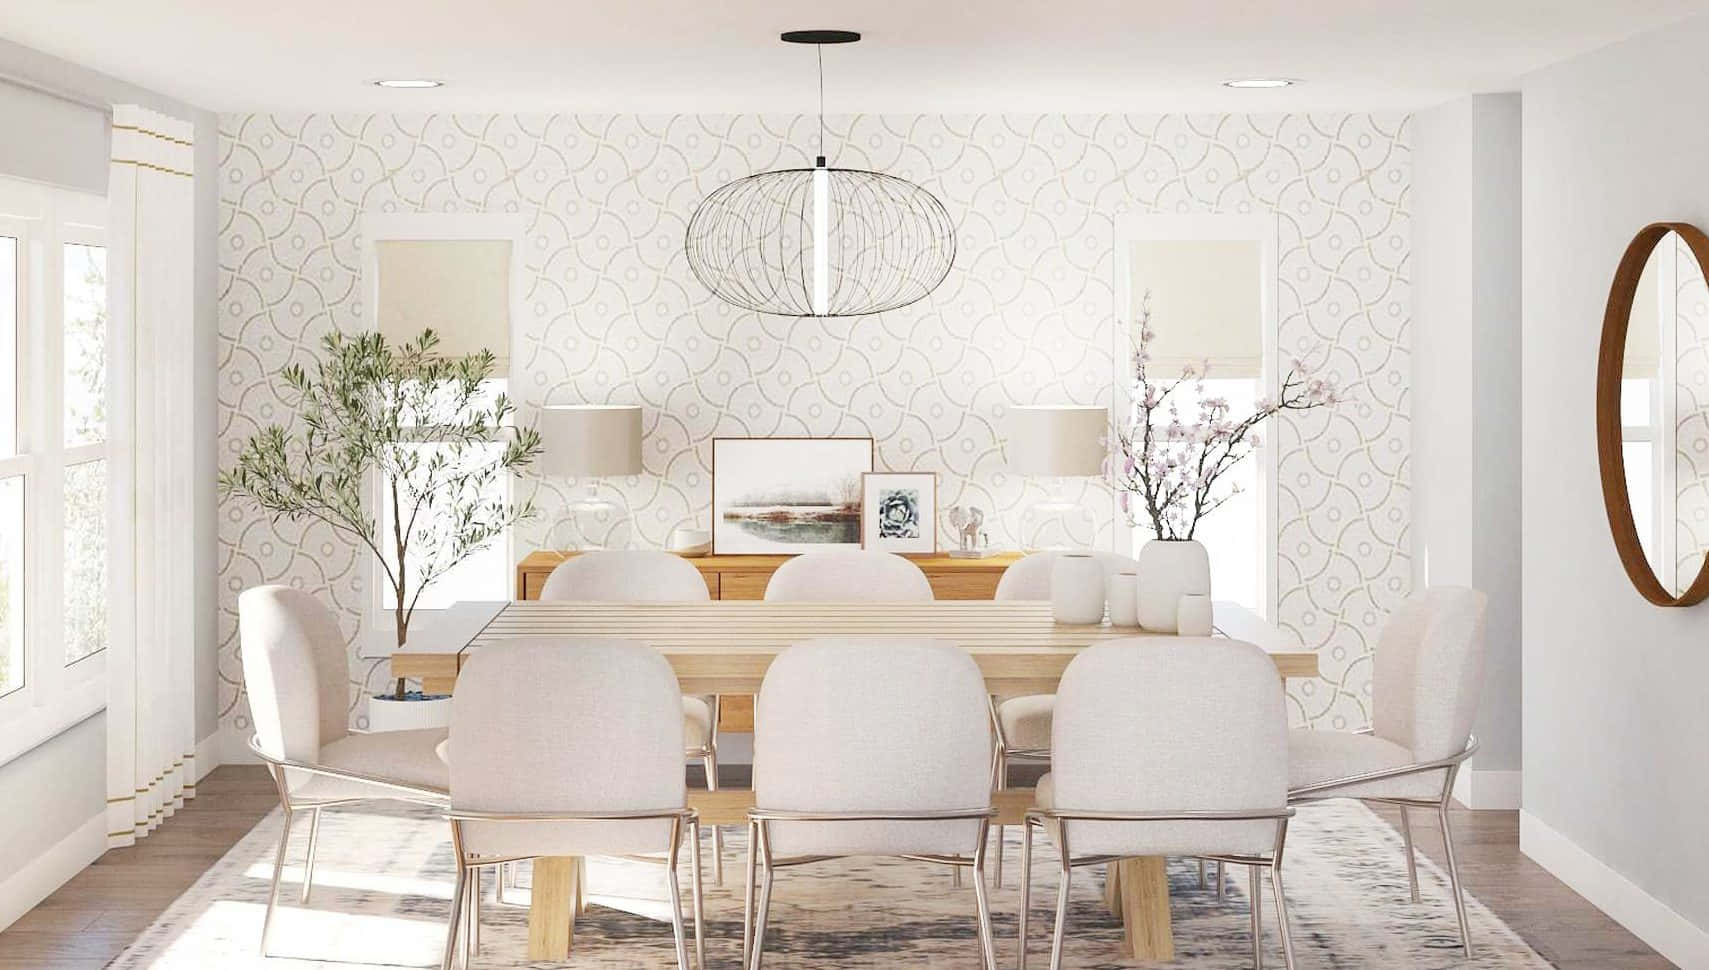 A Dining Room With White Chairs And A Round Table